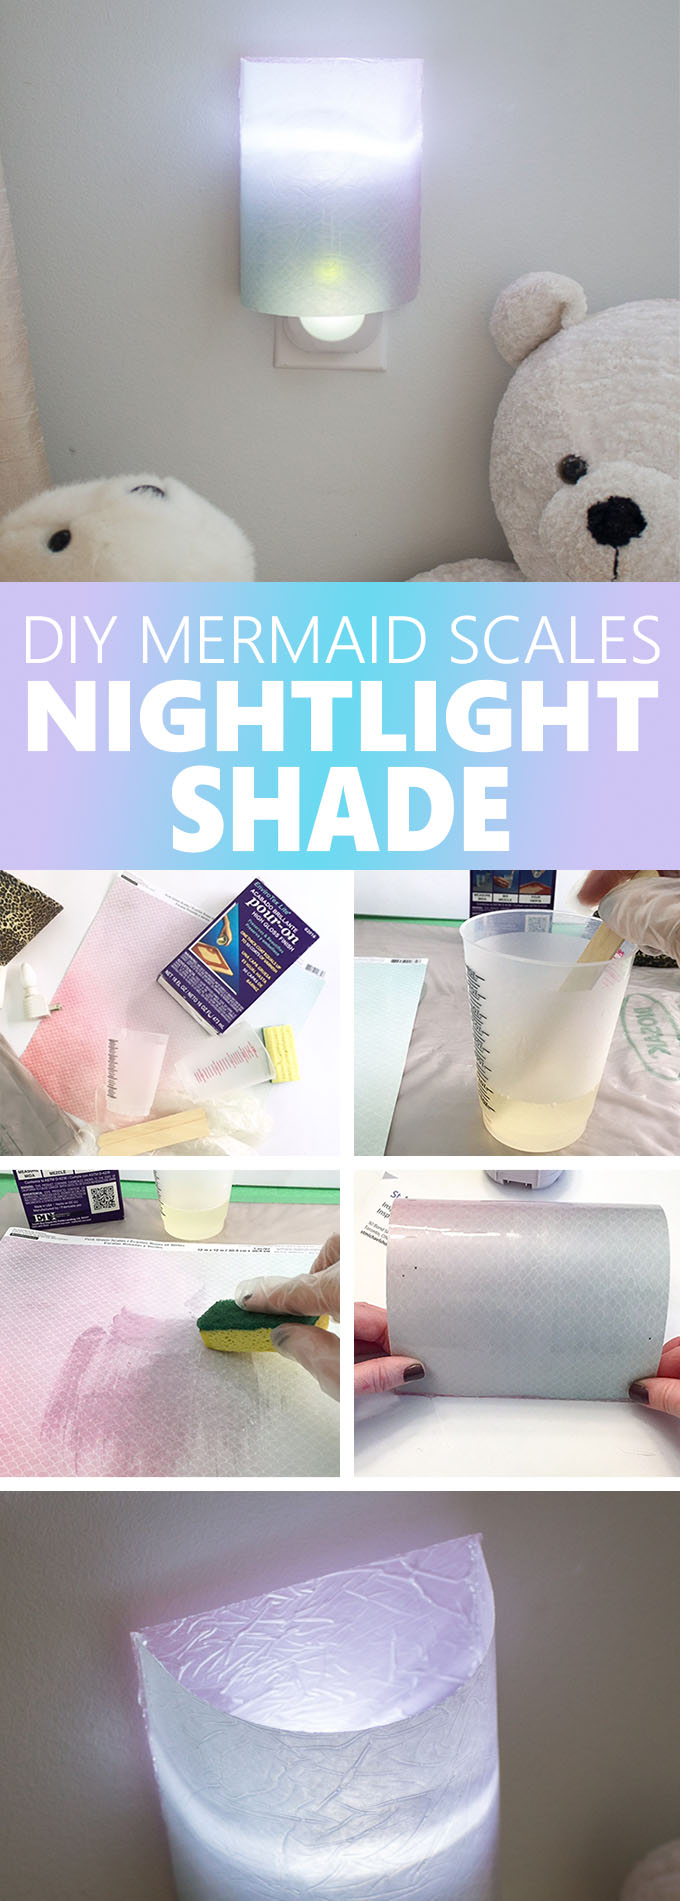 So clever! Mermaid-themed shade for a nightlight. Learn how to make a resin paper DIY night light cover. Cute kids bedroom decor. #resincrafts #resincraftsblog #mermaid #nightlight via @resincraftsblog